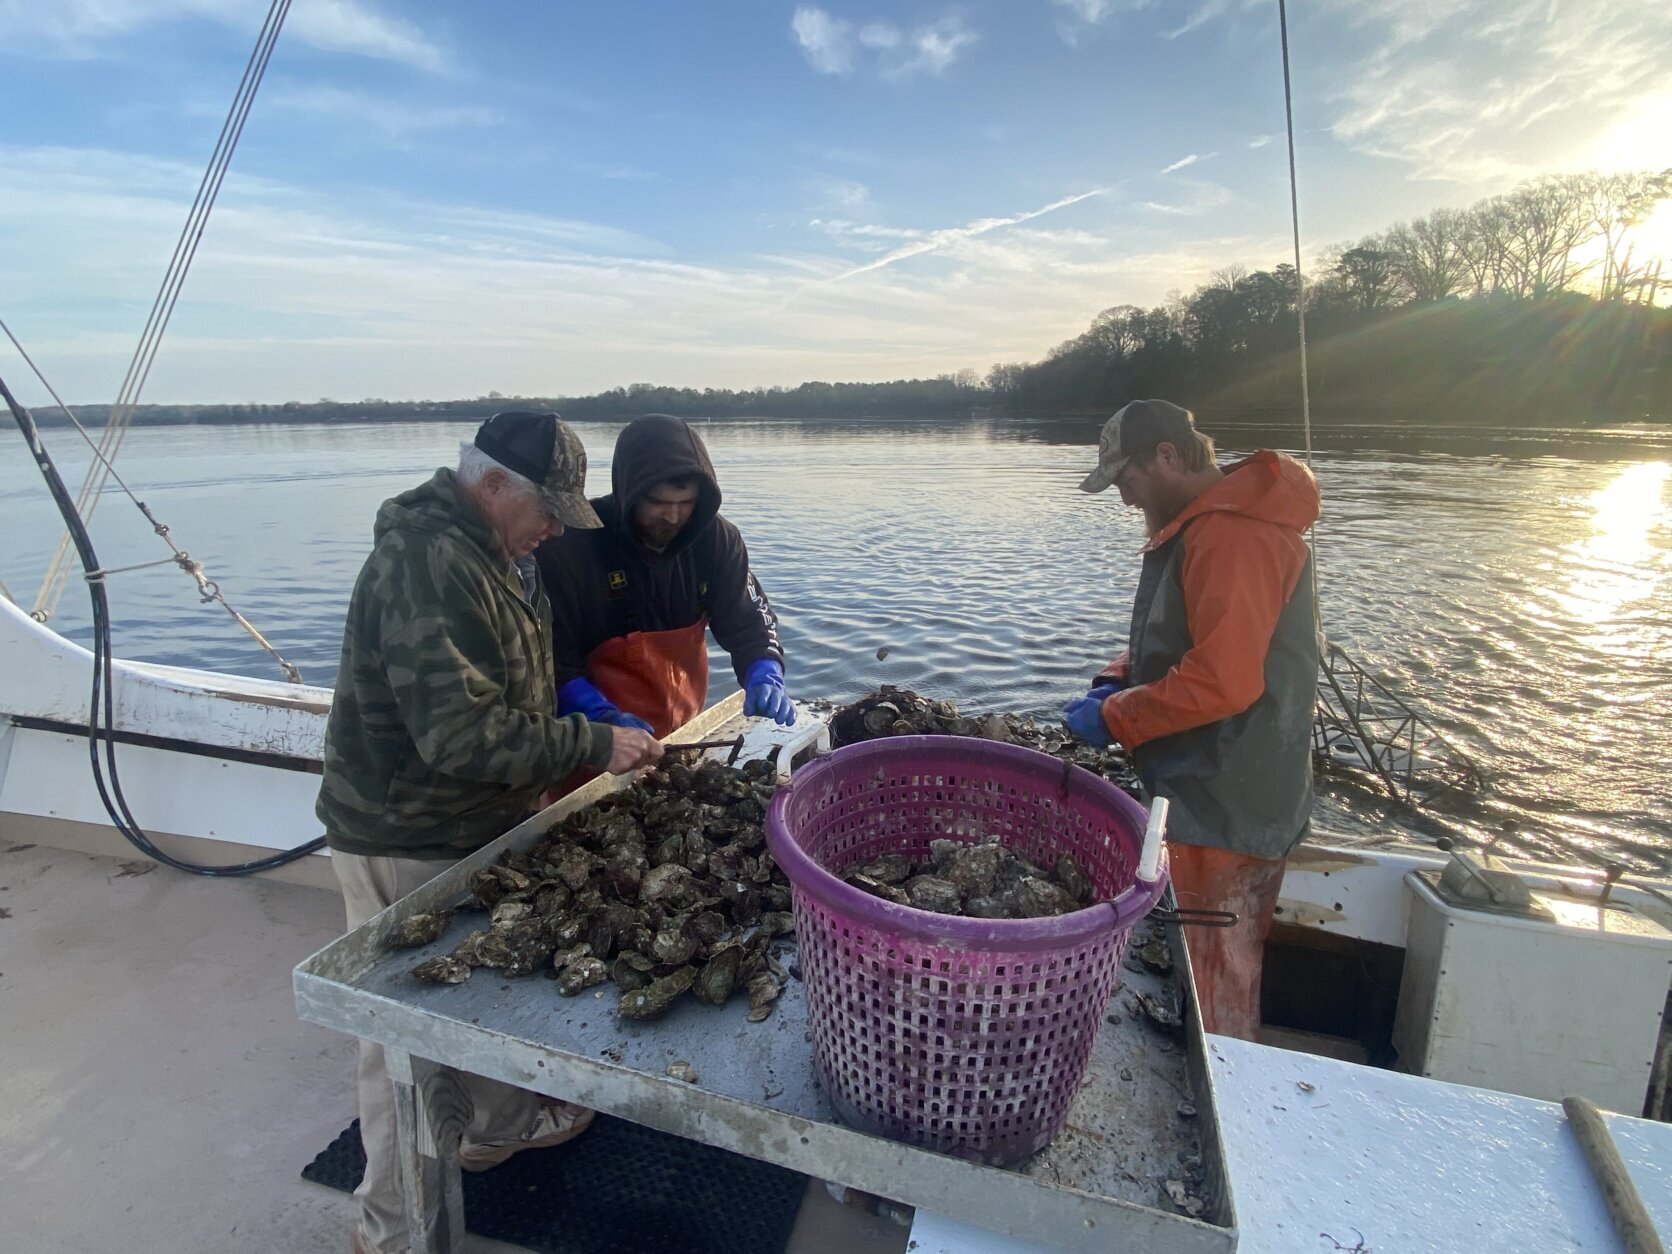 Three waterman work to harvest oysters.